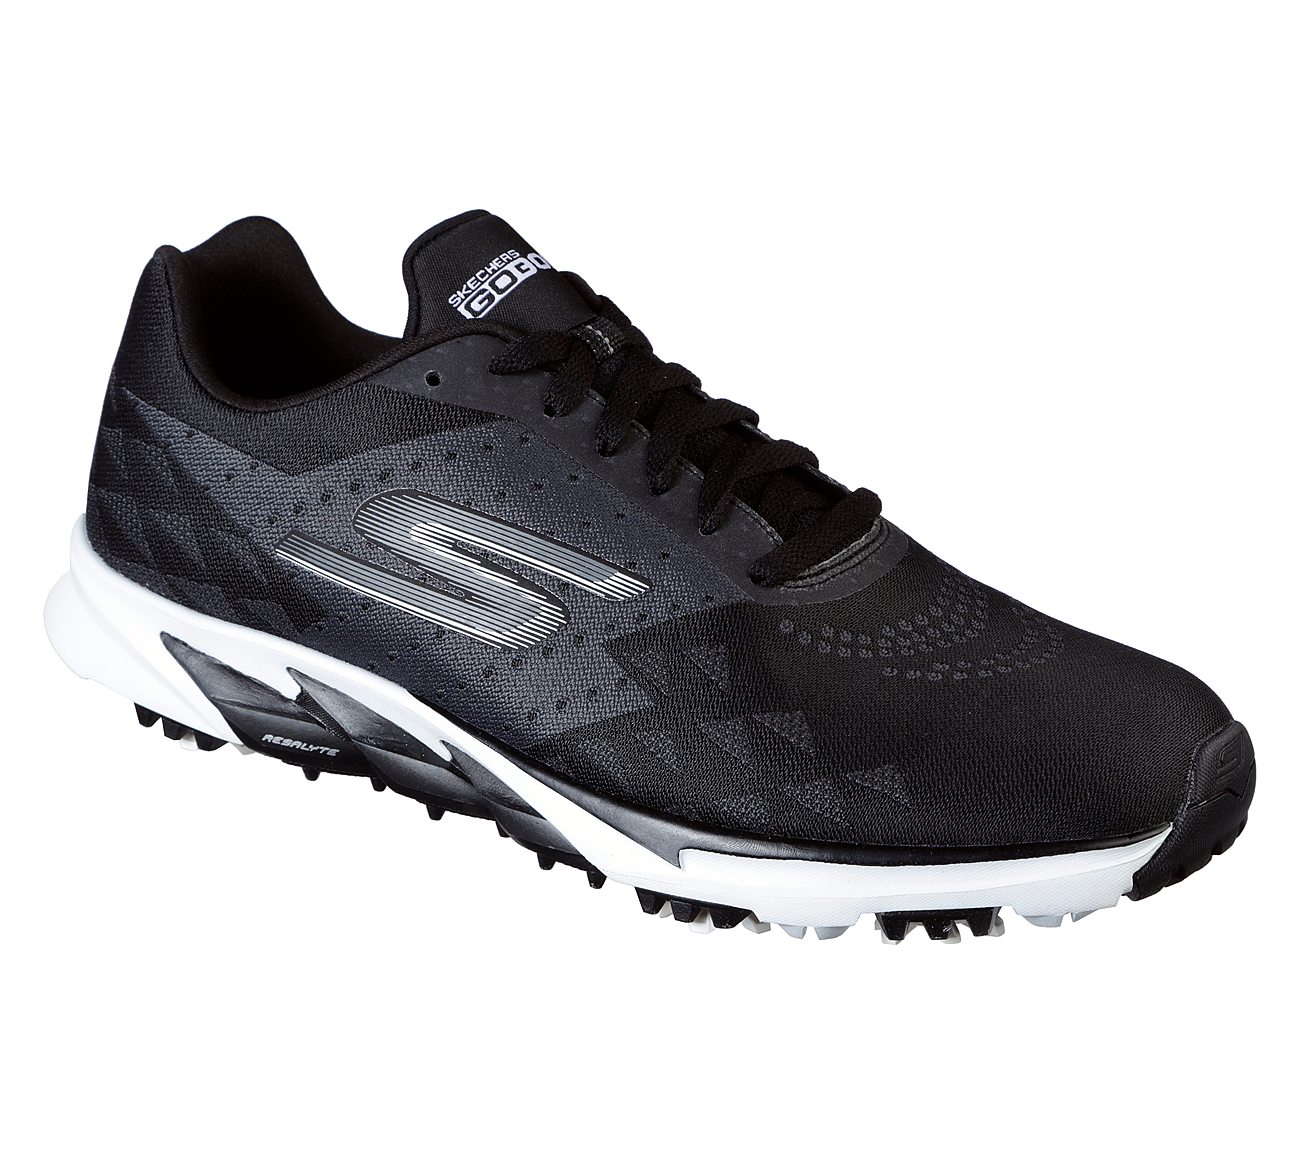 skechers performance golf shoes